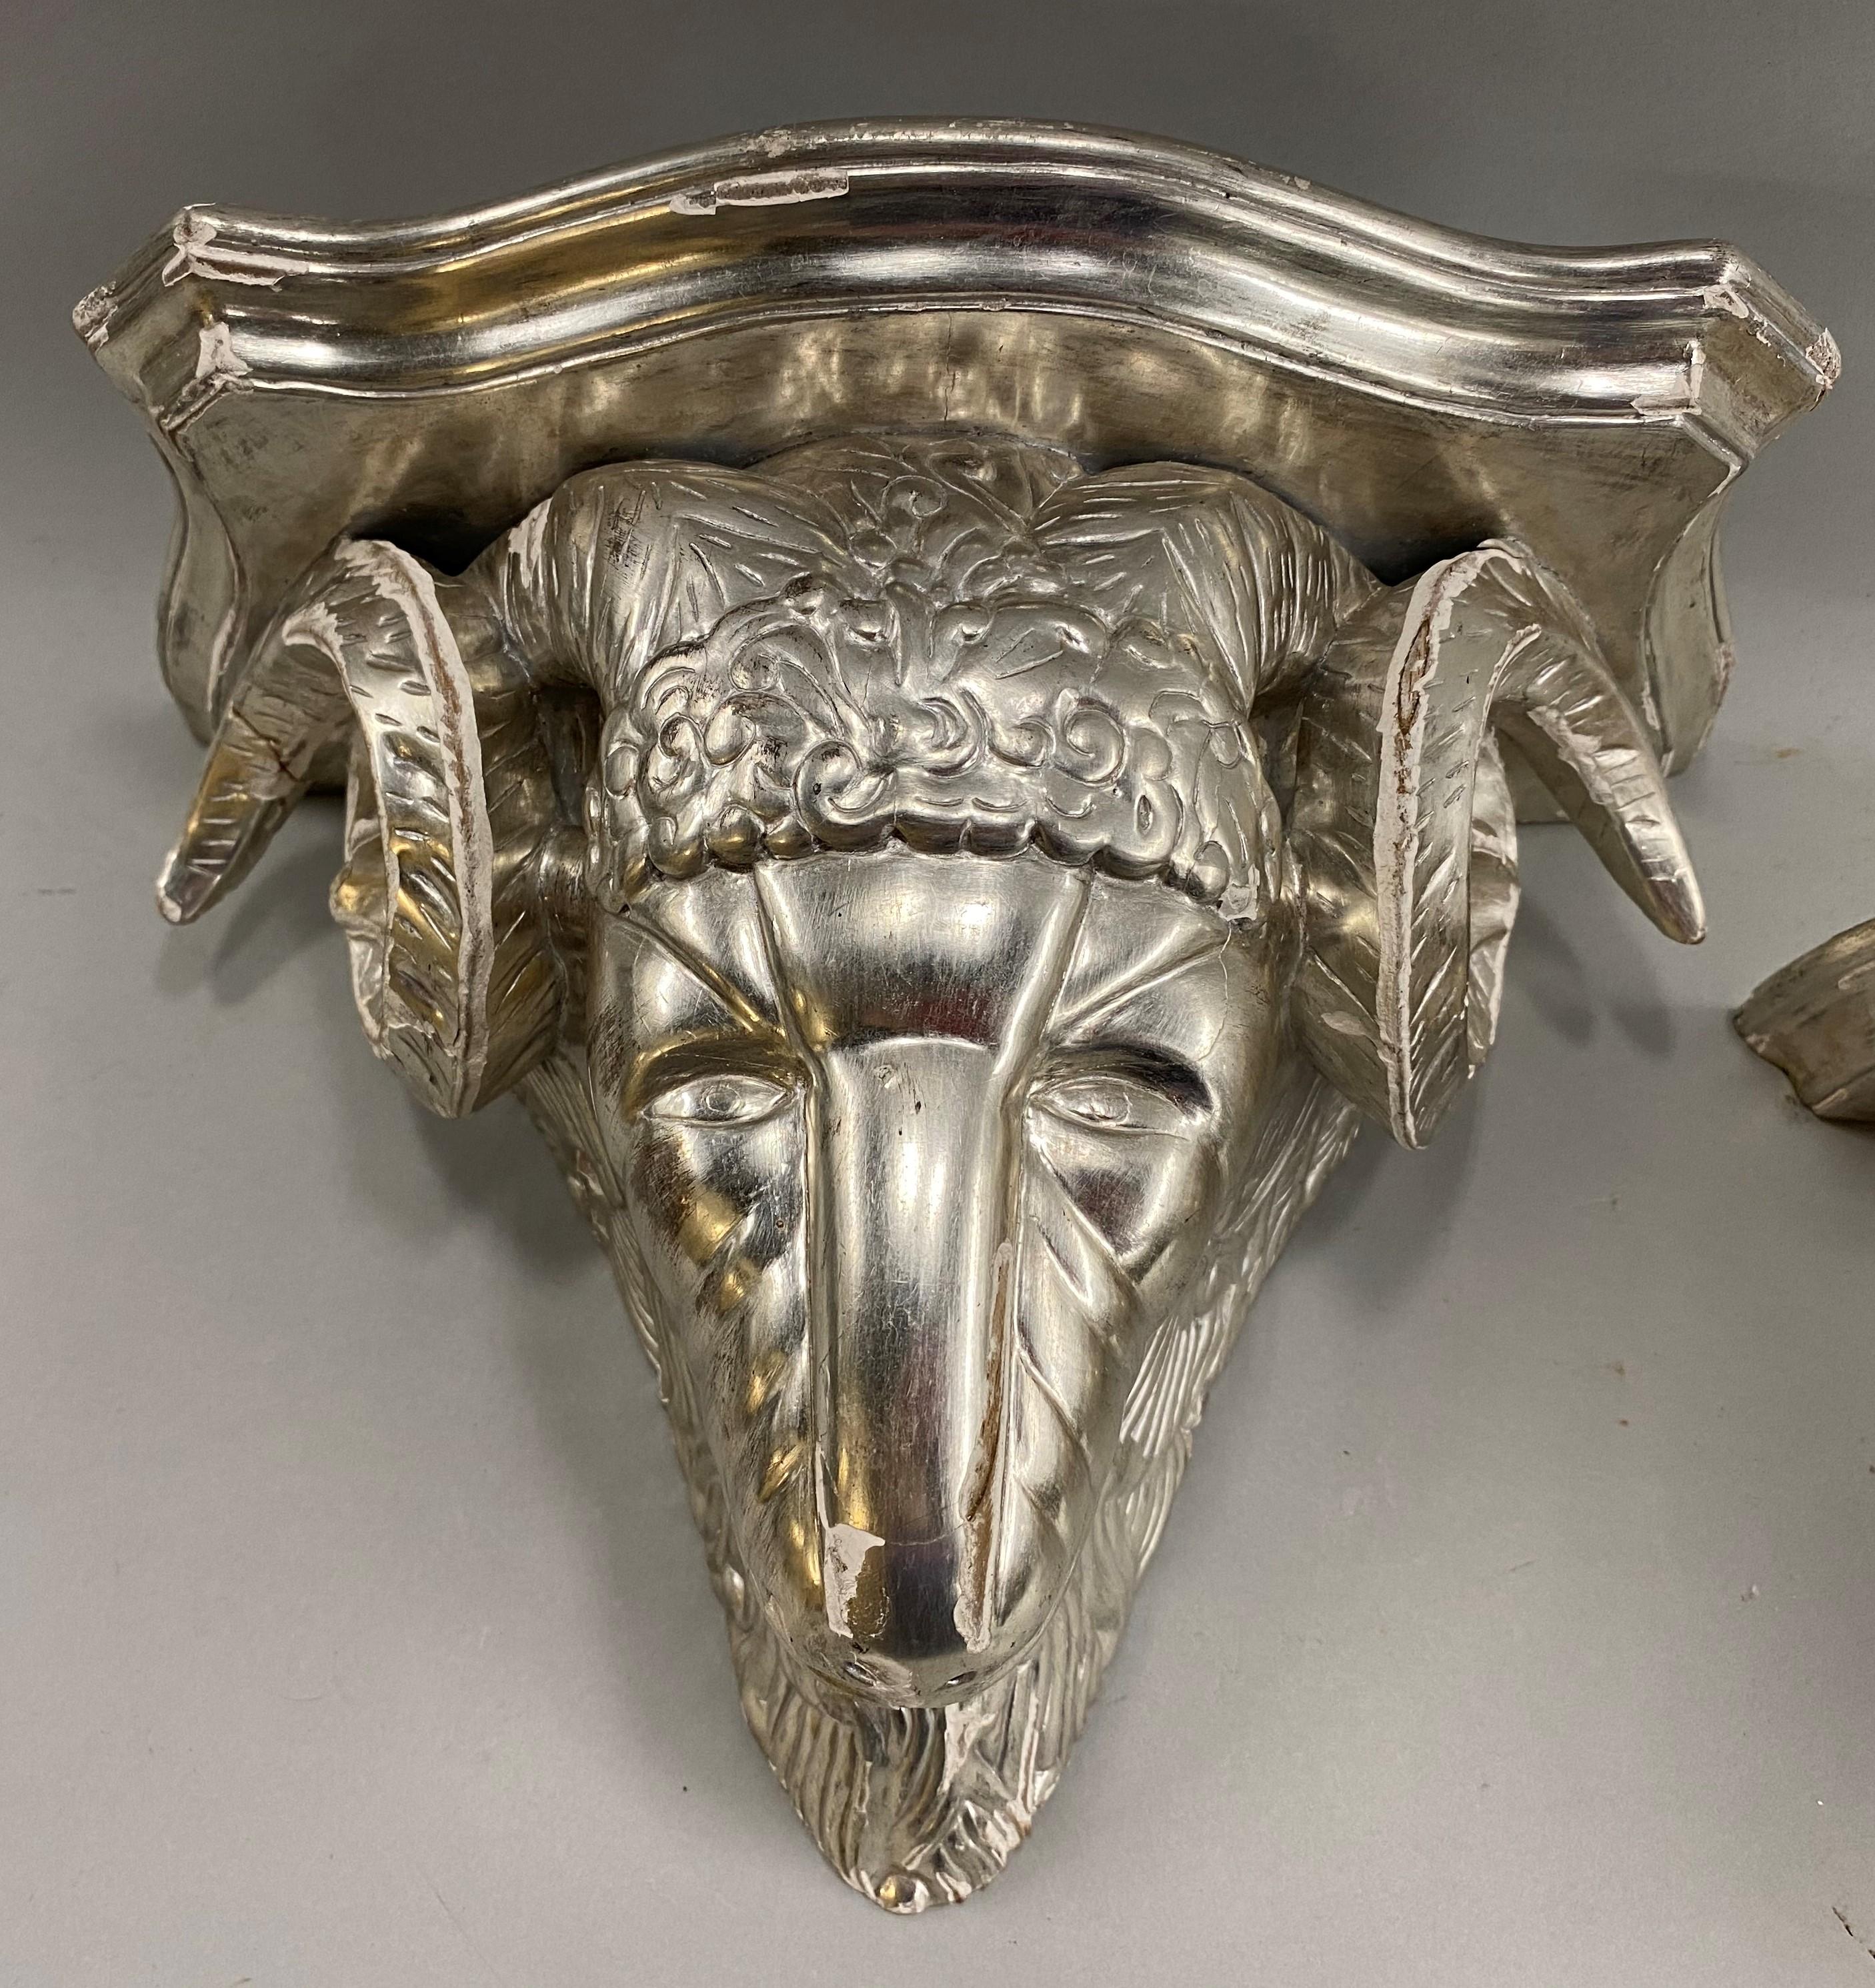 A fine Italian decorative pair of silver leaf ram’s head figural wooden wall brackets with shaped tops, lightly distressed, dating to the 20th century, in very good overall condition, with intentional edge leaf losses, other minor imperfections and